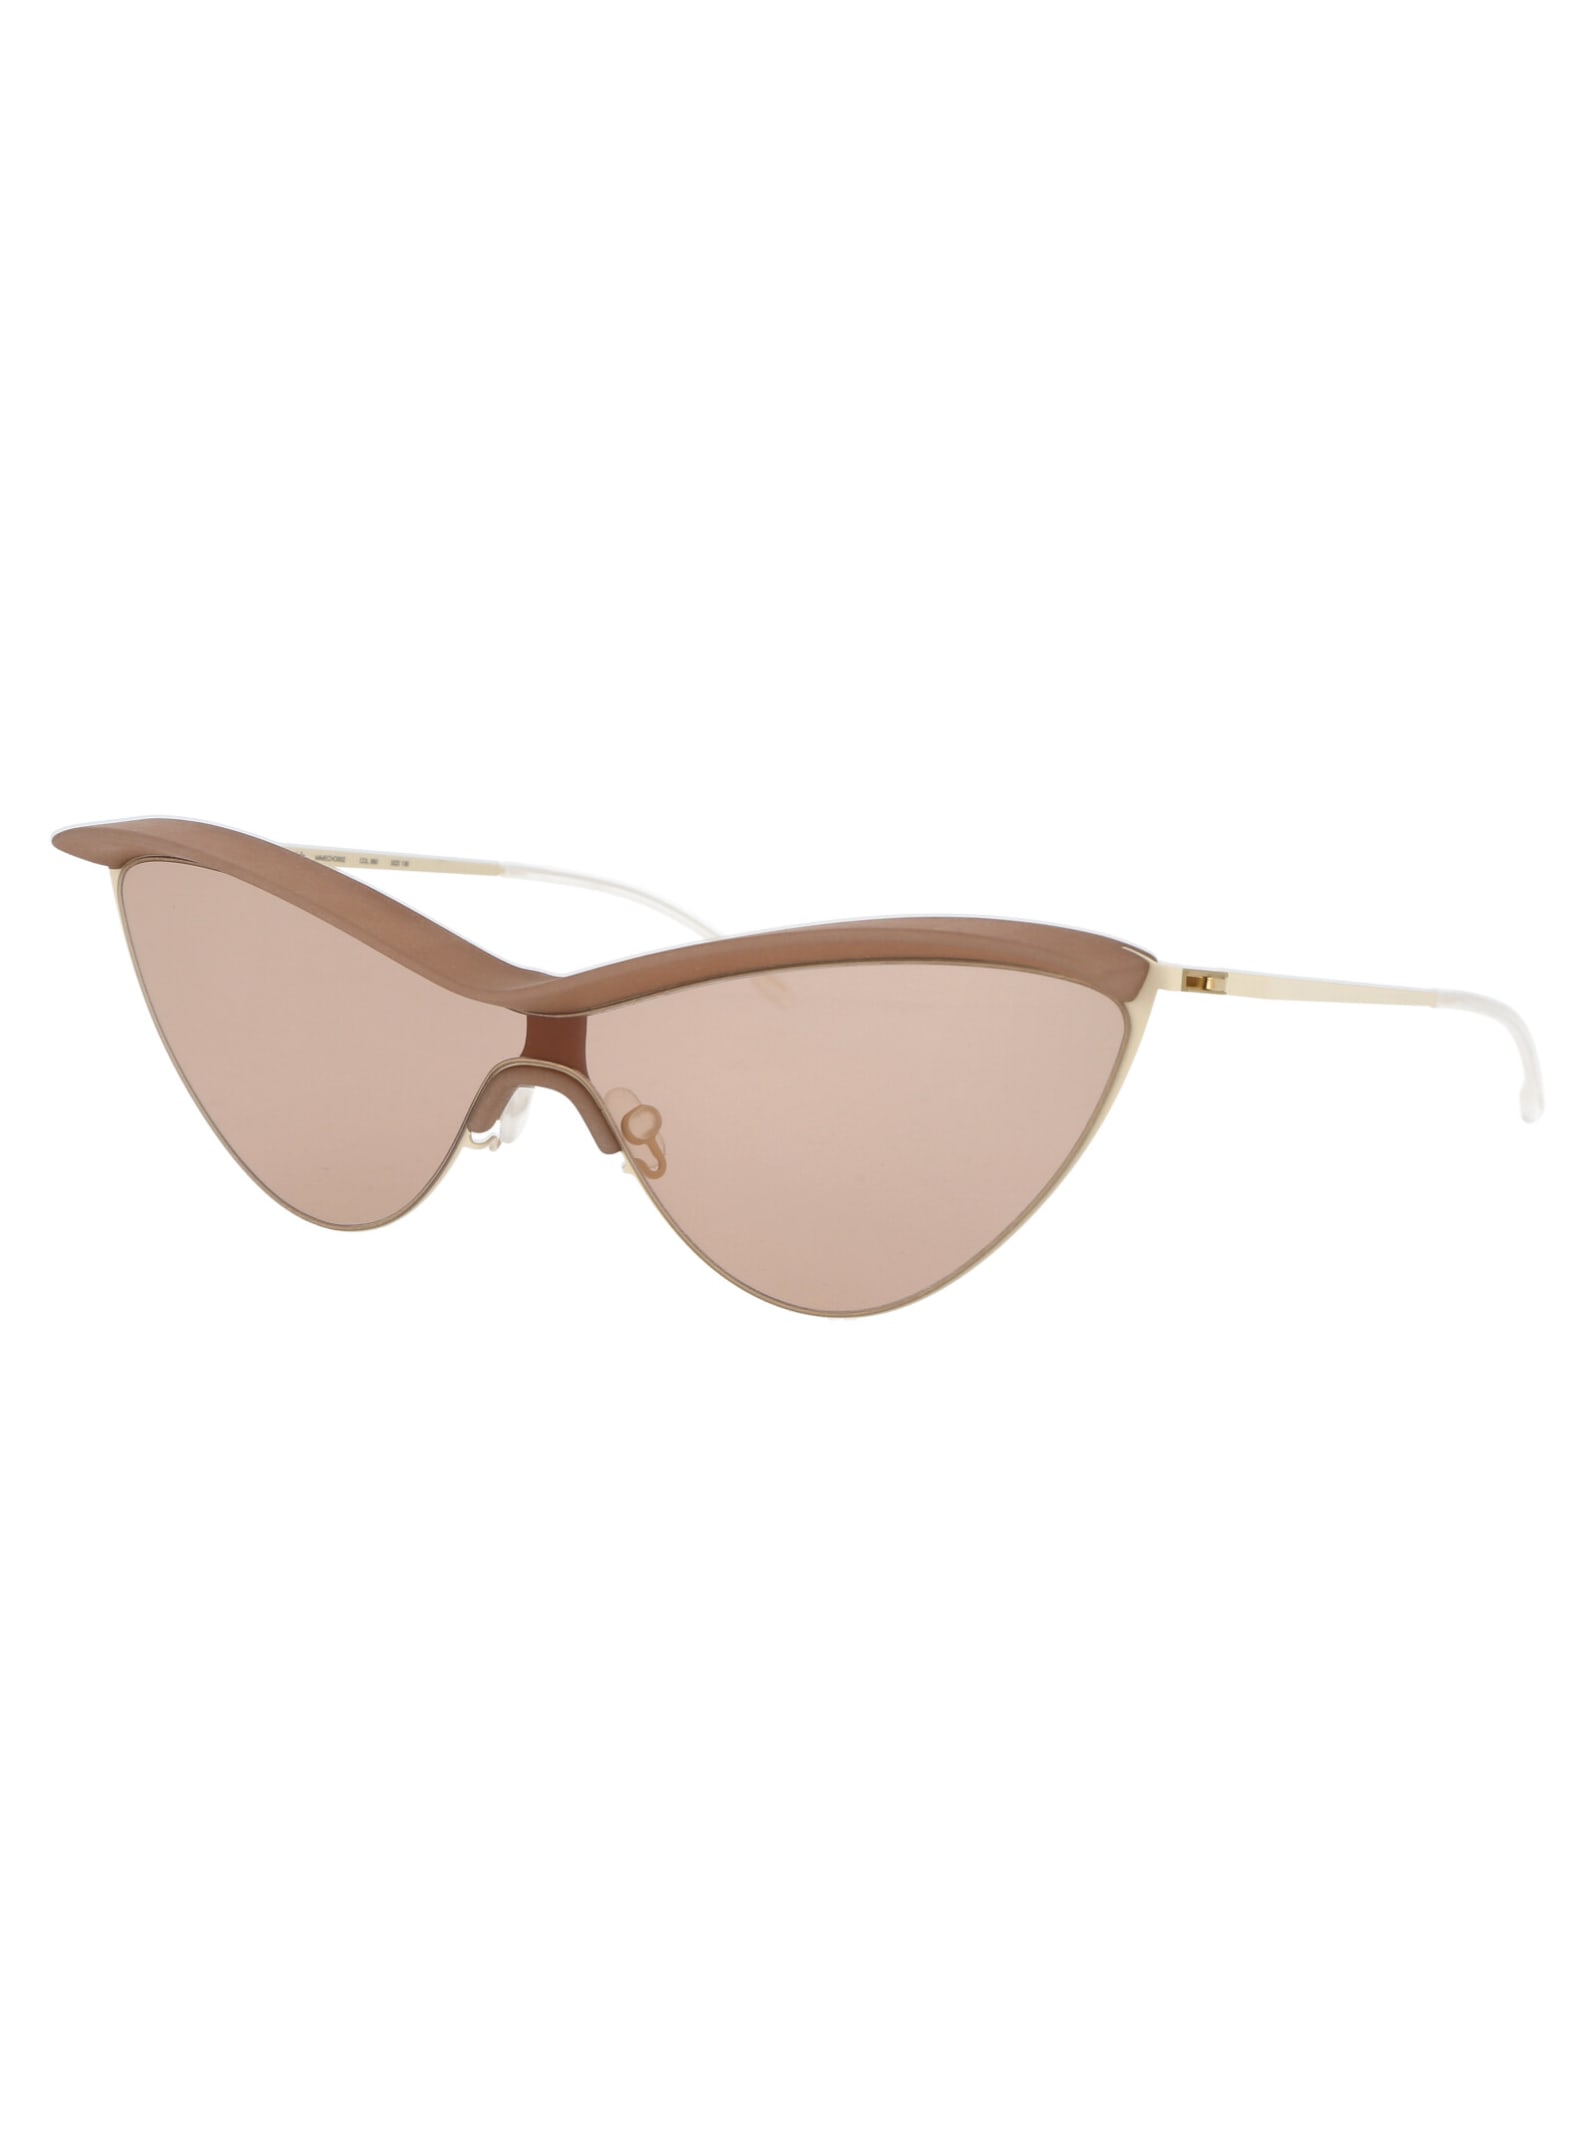 Shop Mykita Mmecho002 Sunglasses In 350 Mh21 Nude Off White Nude Solid Shield